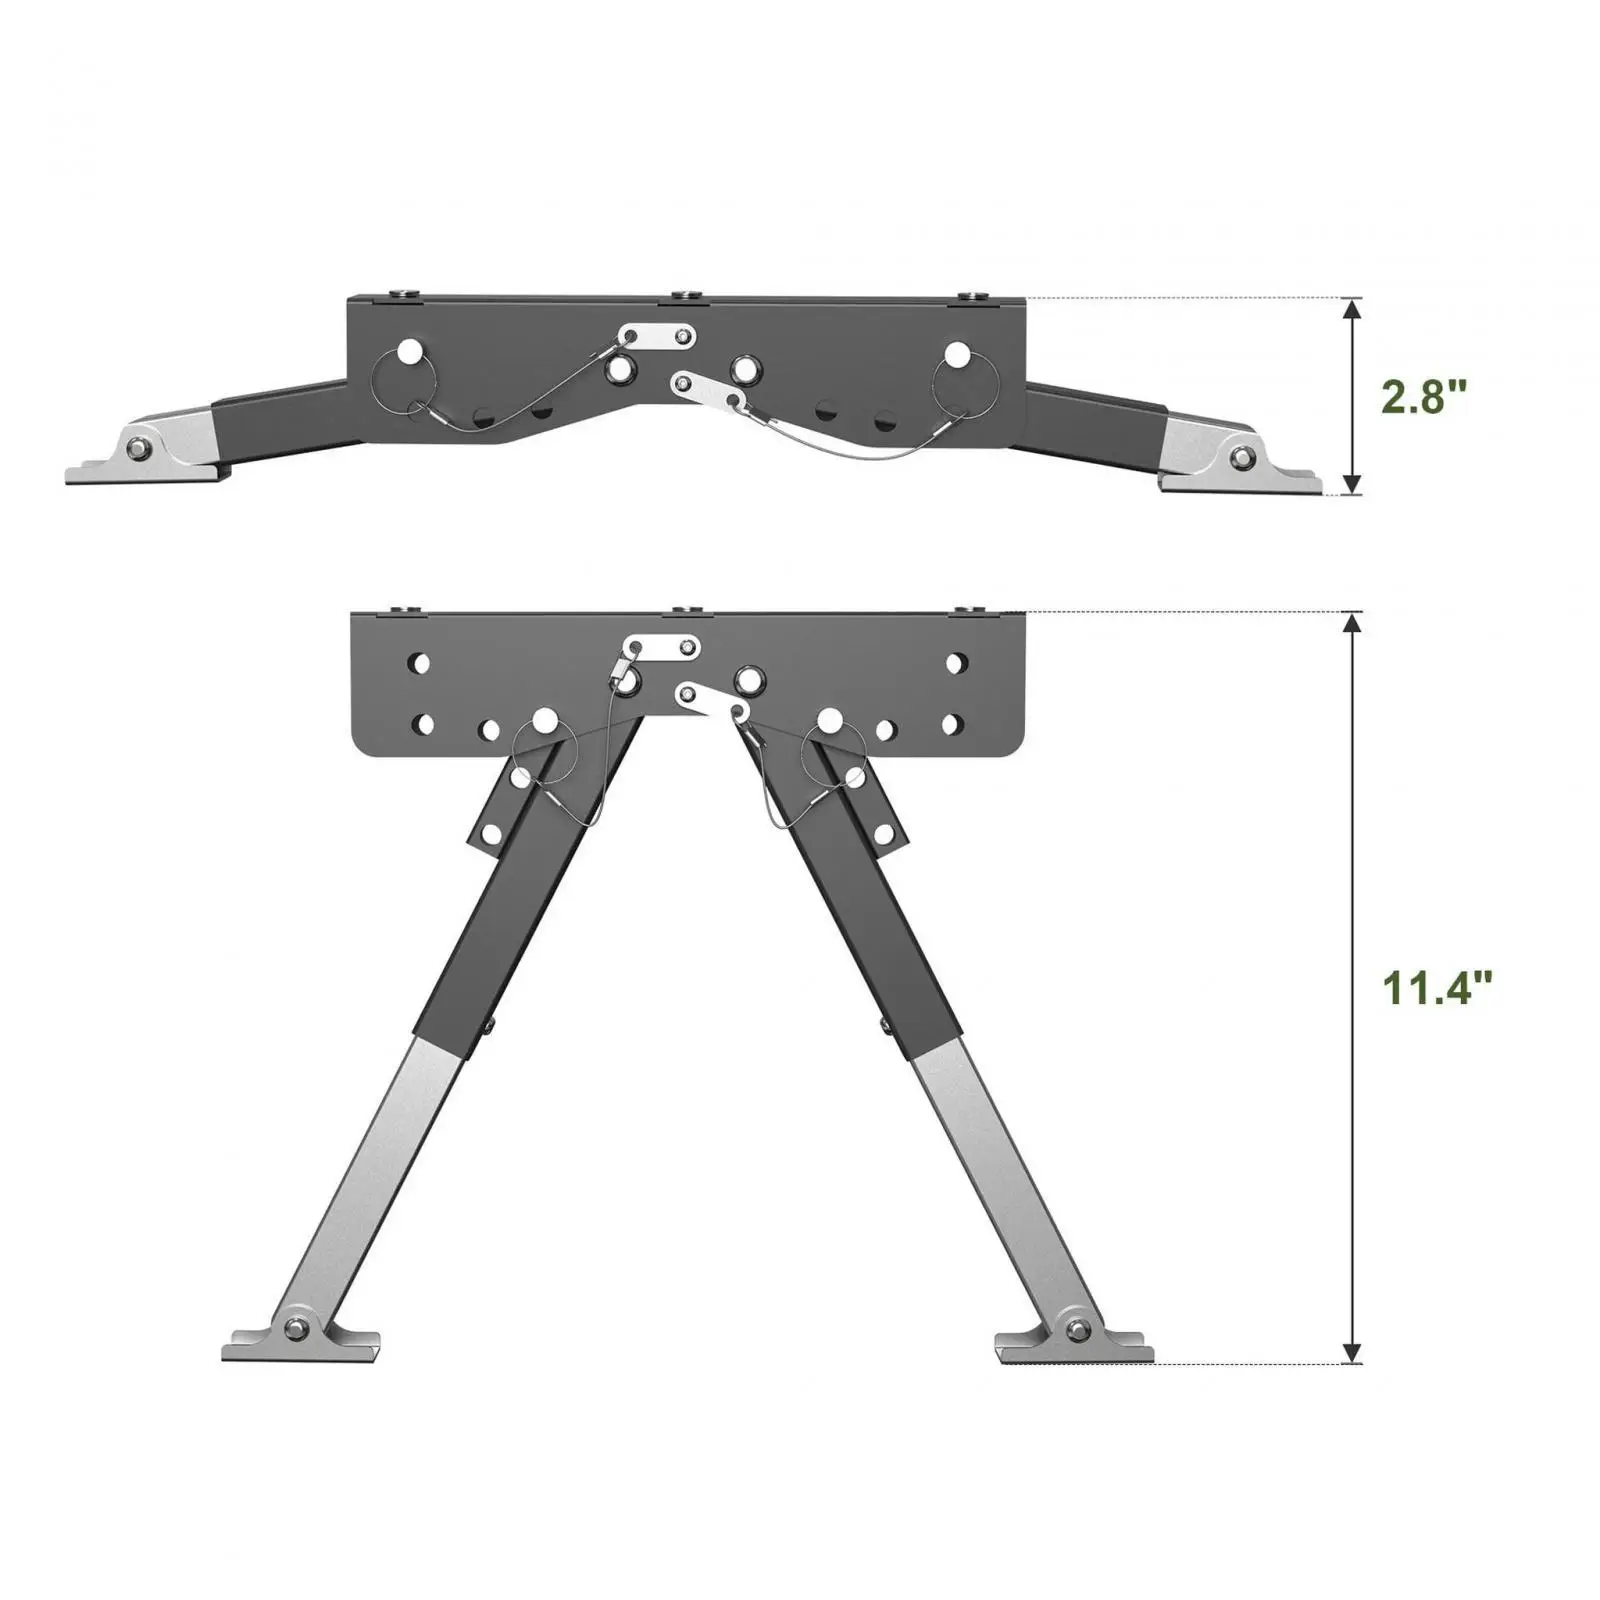 RV Step Stabilizer RV Step Support Stabilizer Folding Outdoor Multifunctional Quickly and Easily Adjust Height RV Accessories